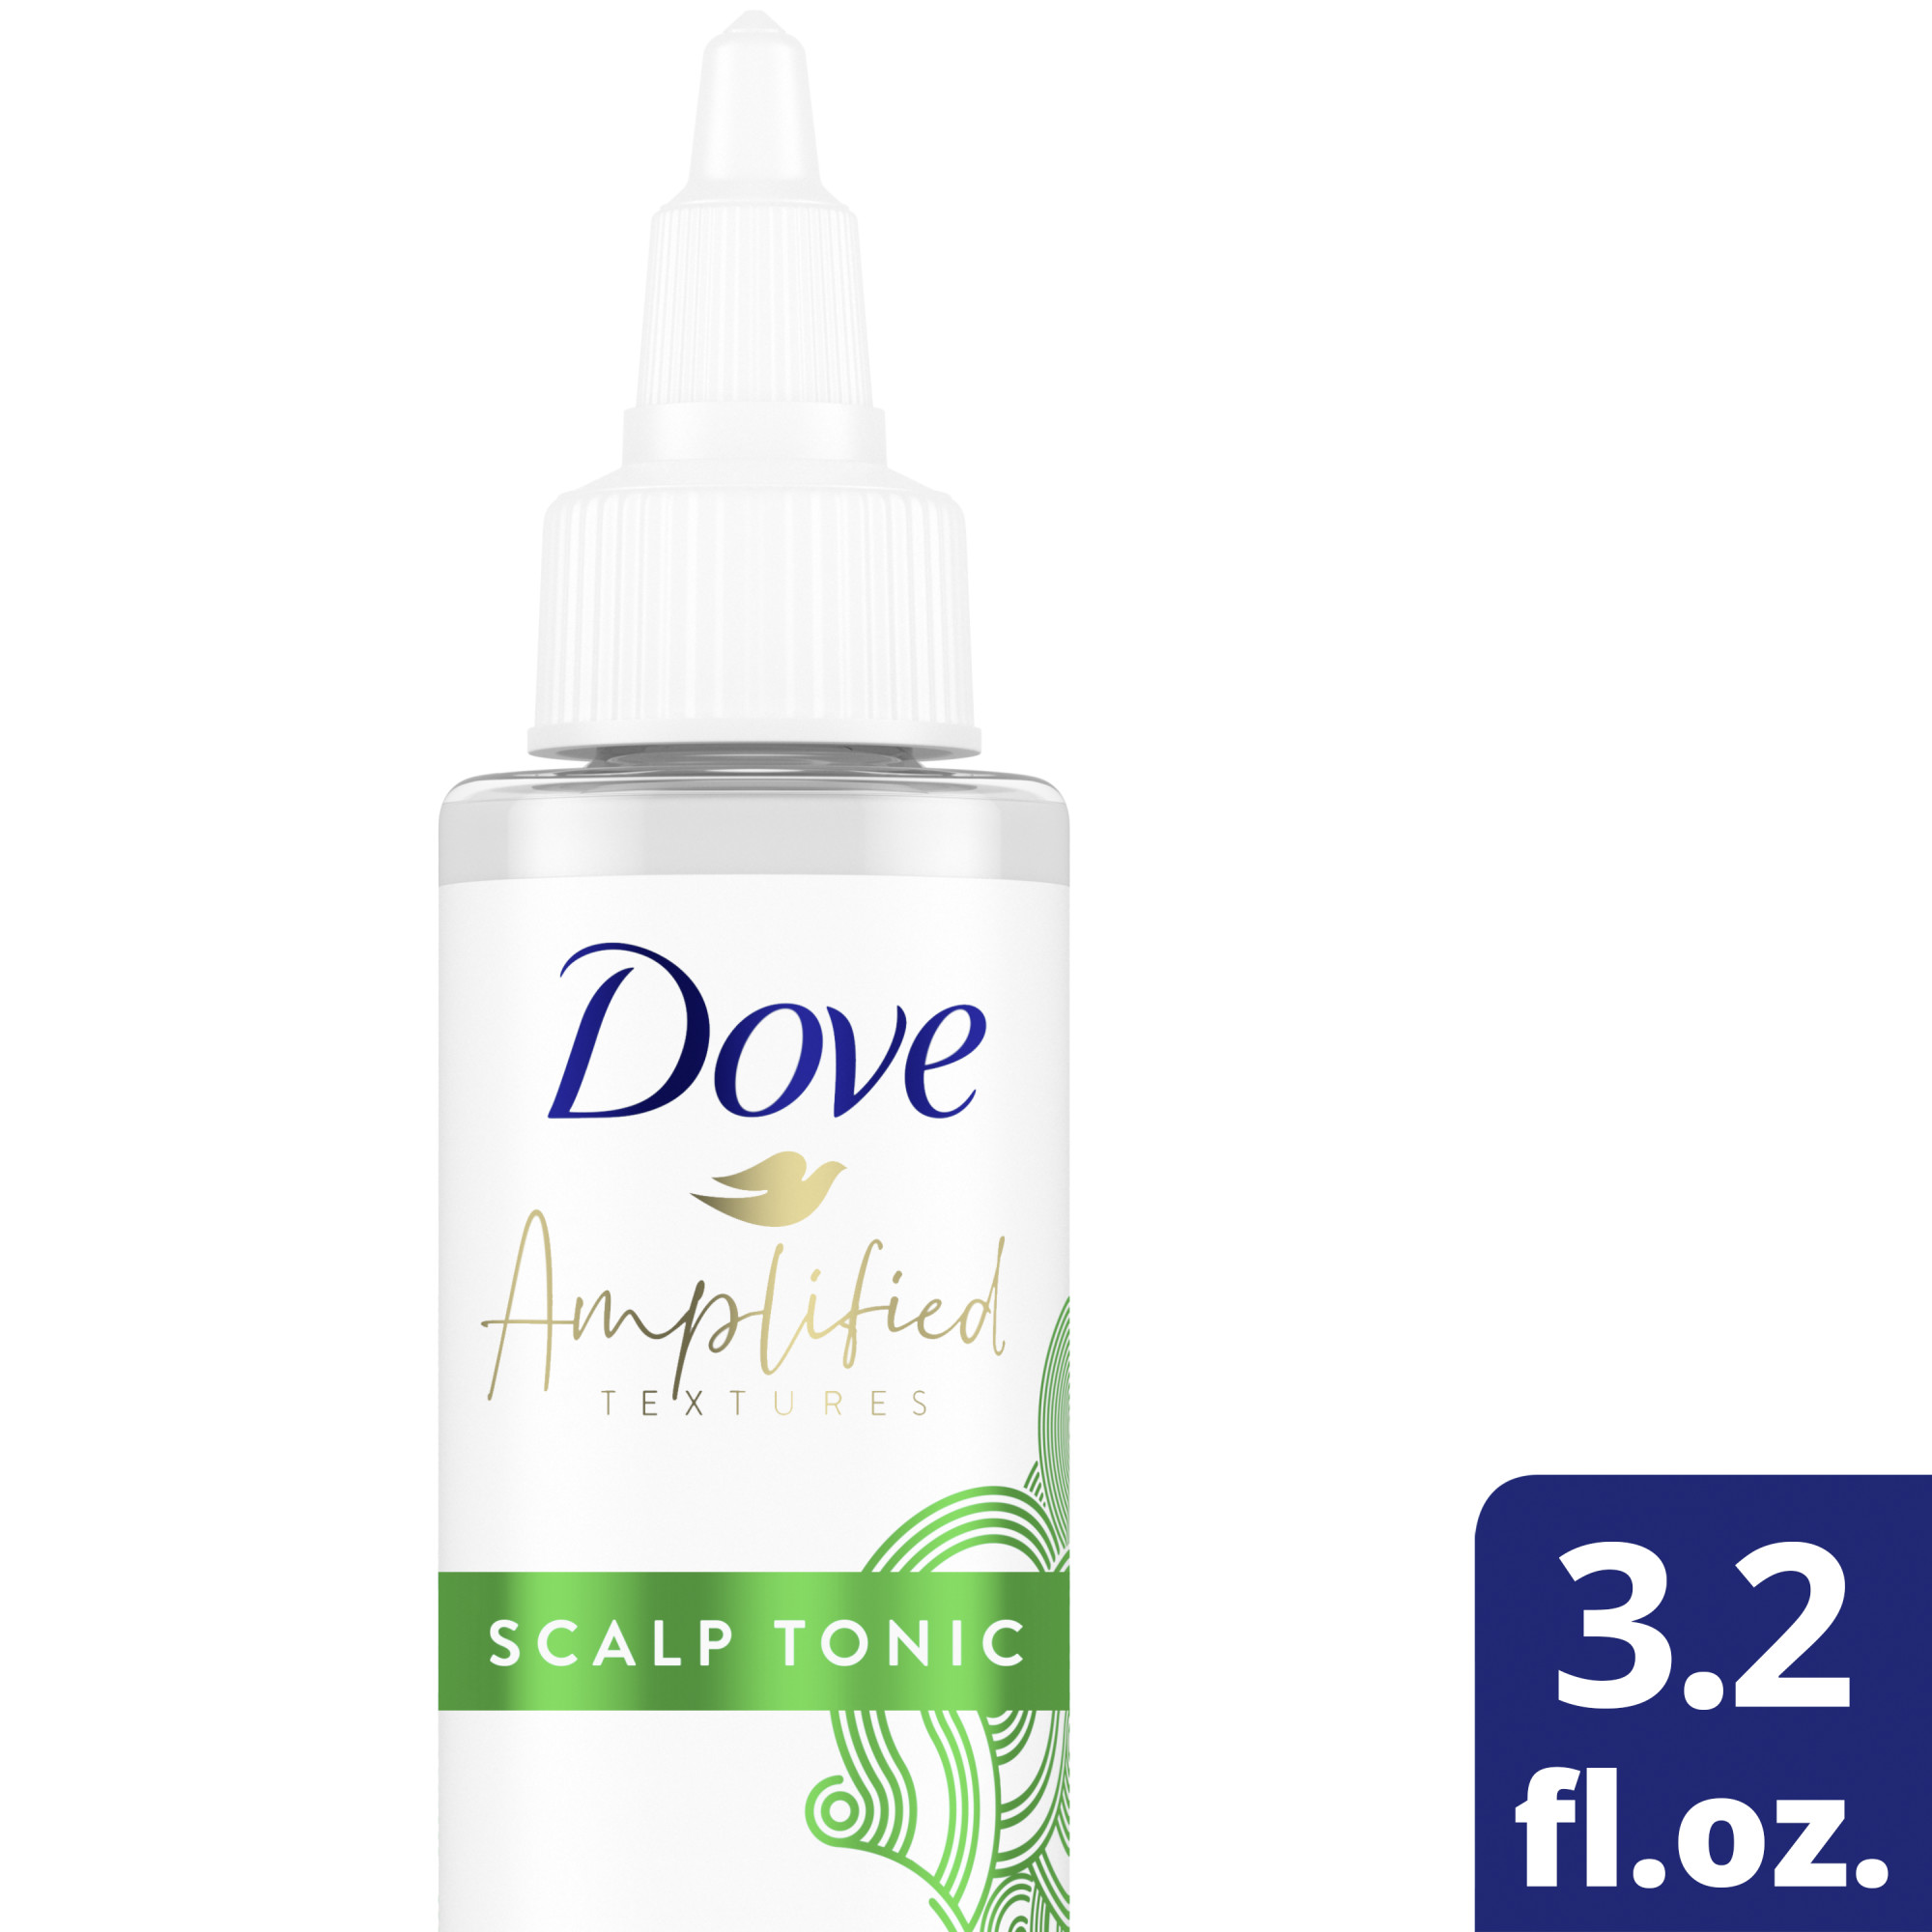 Dove Amplified Textures Vitamin B3 and Aloe Extract Hair and Scalp Treatment, 3.2 oz - image 1 of 10